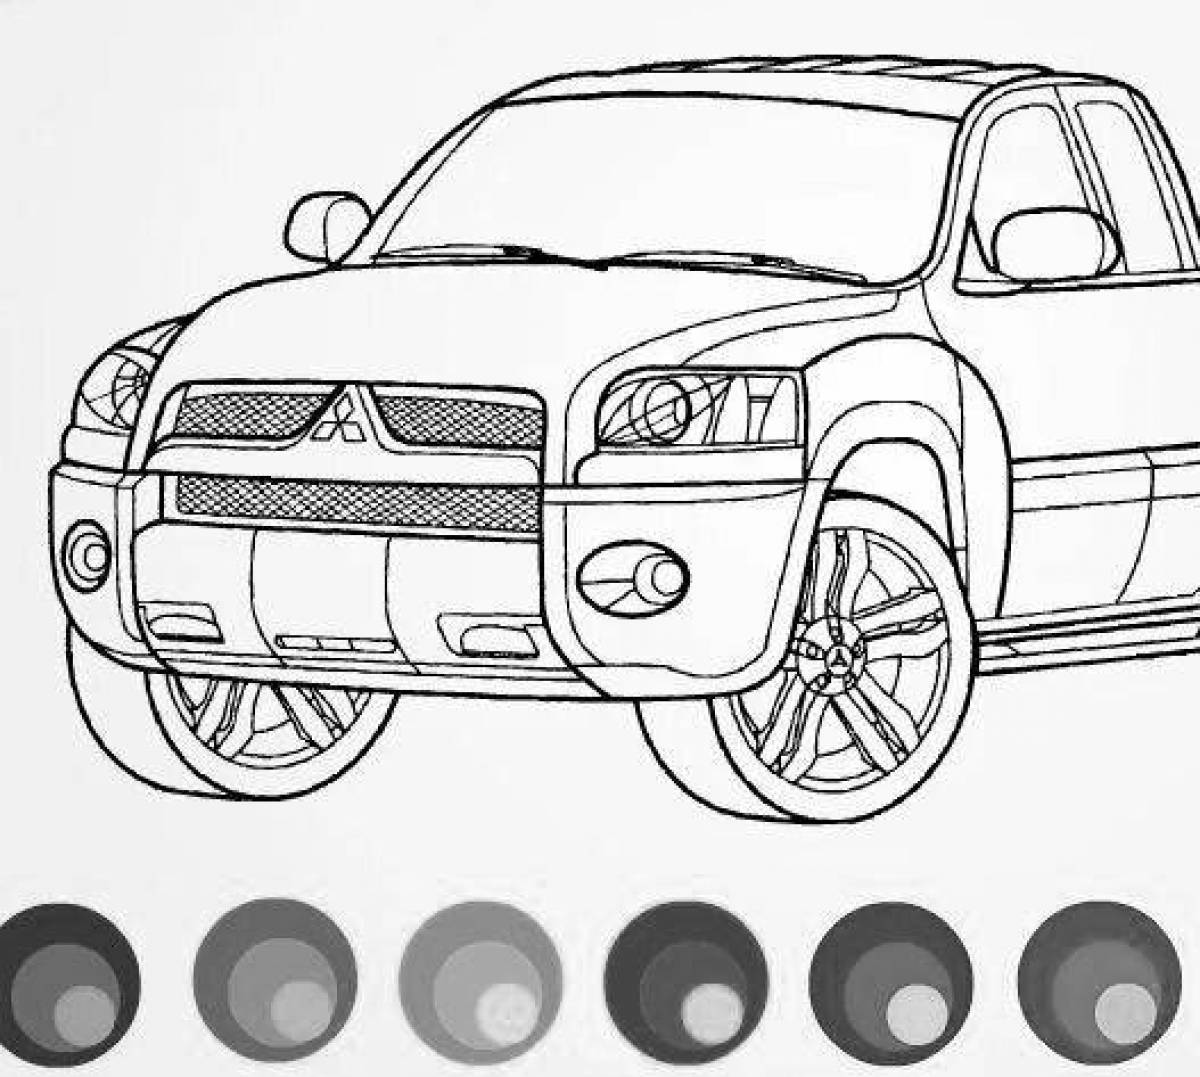 Wonderful car games for boys coloring